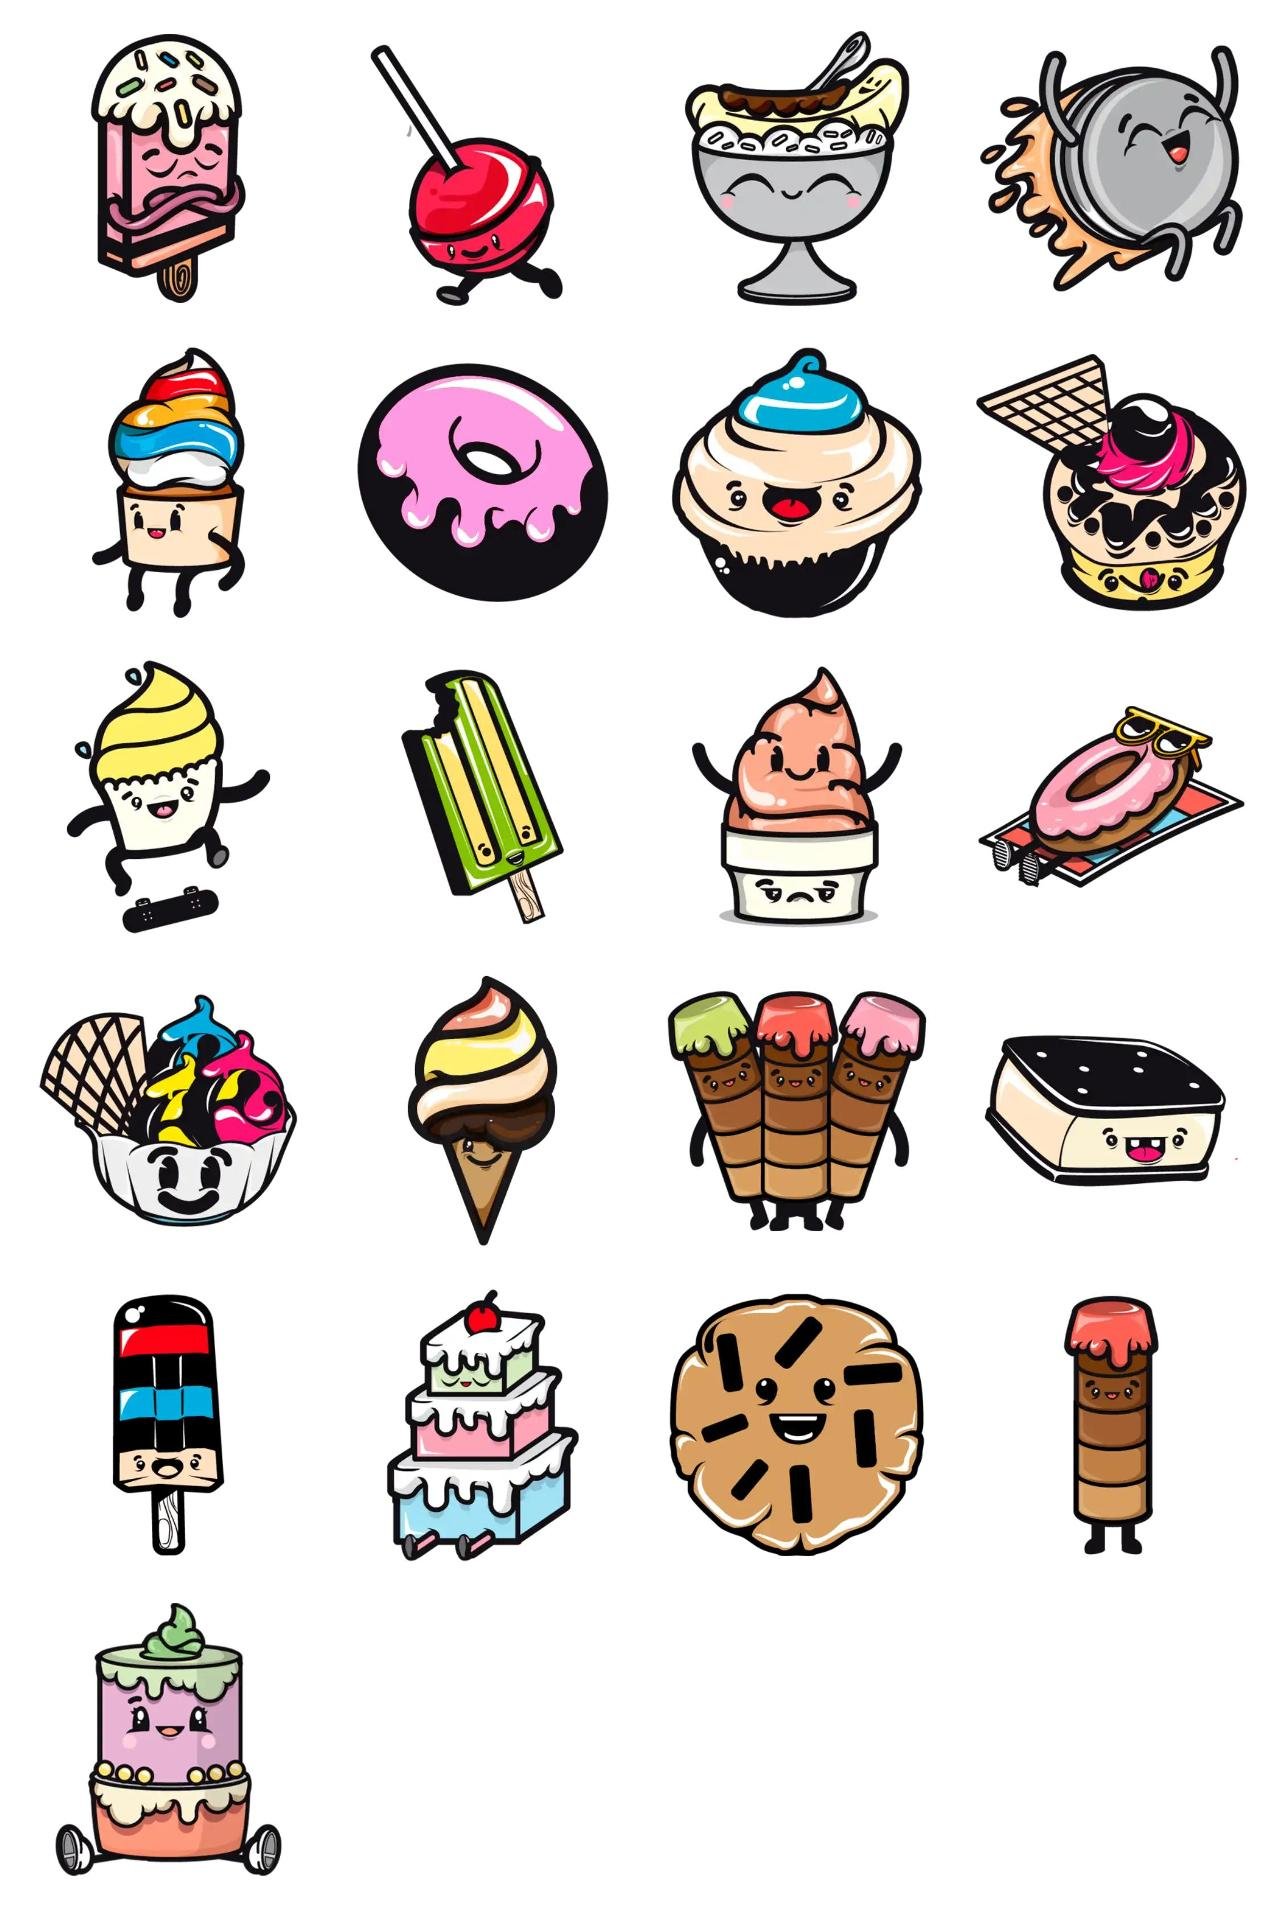 Chocotoy Food/Drink sticker pack for Whatsapp, Telegram, Signal, and others chatting and message apps